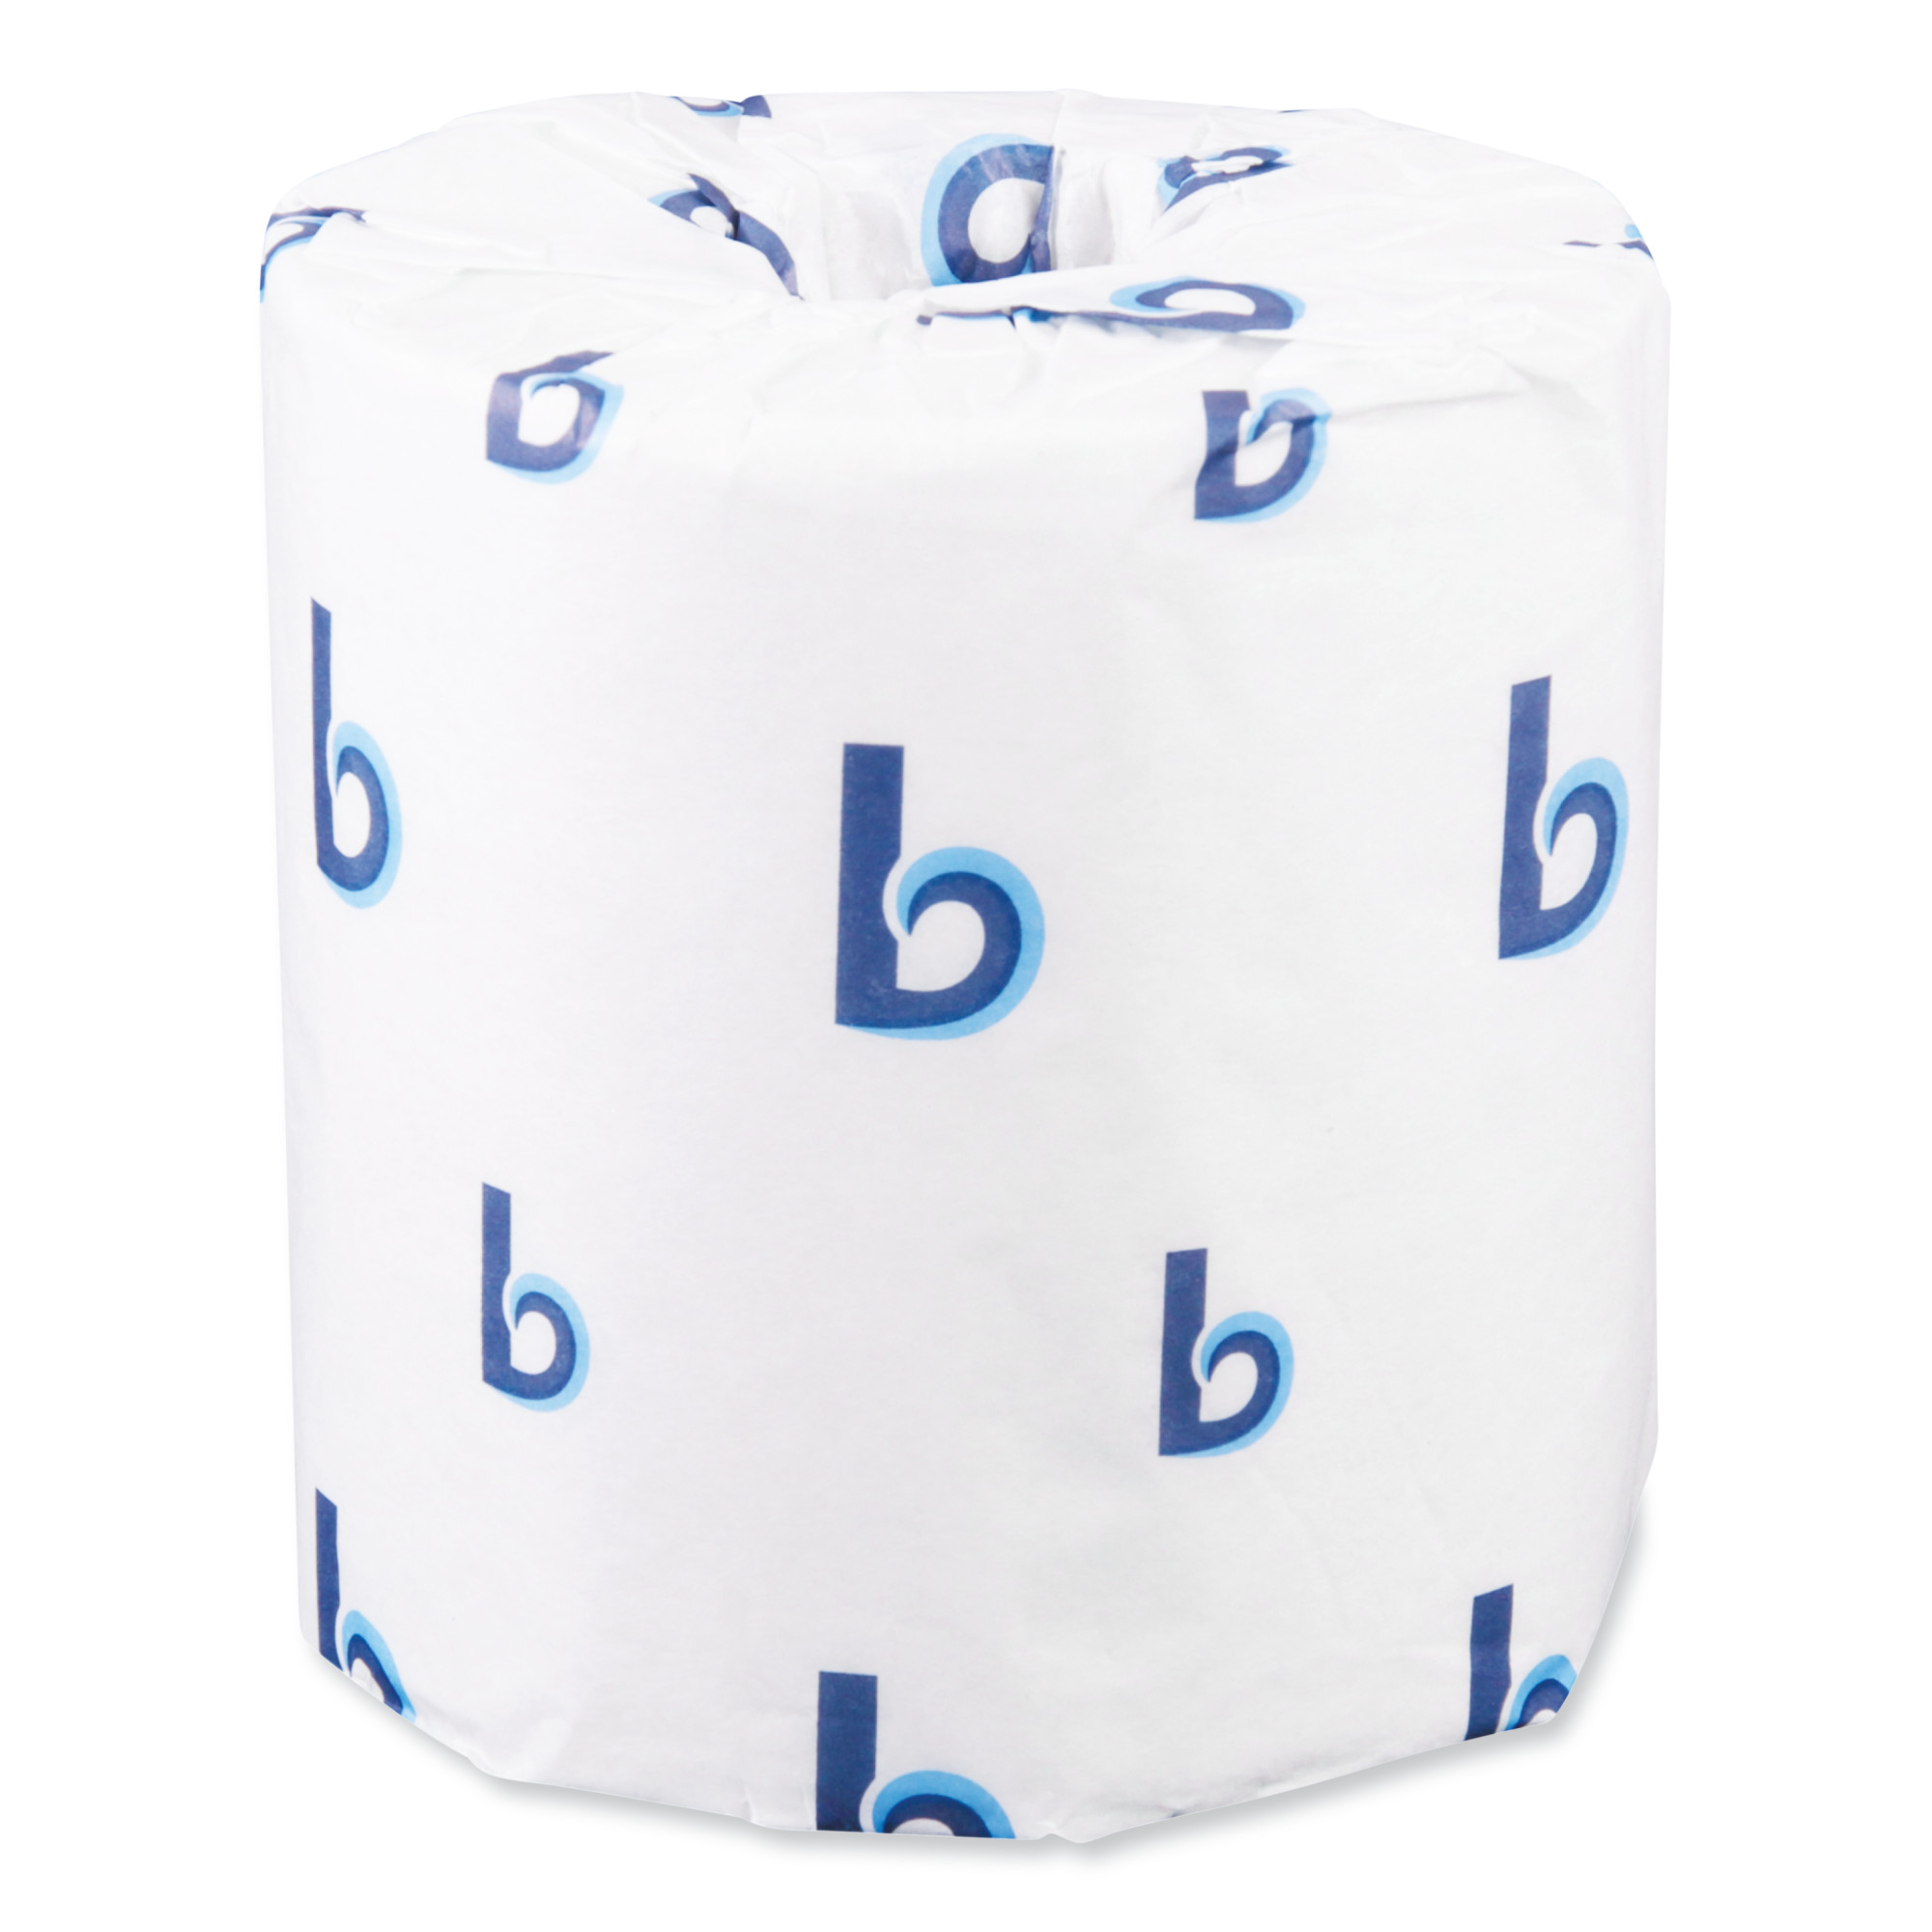 Two-Ply Toilet Tissue, White, 4 1/2 x 3 Sheet, 500 Sheets/Roll, 96 Rolls/Carton